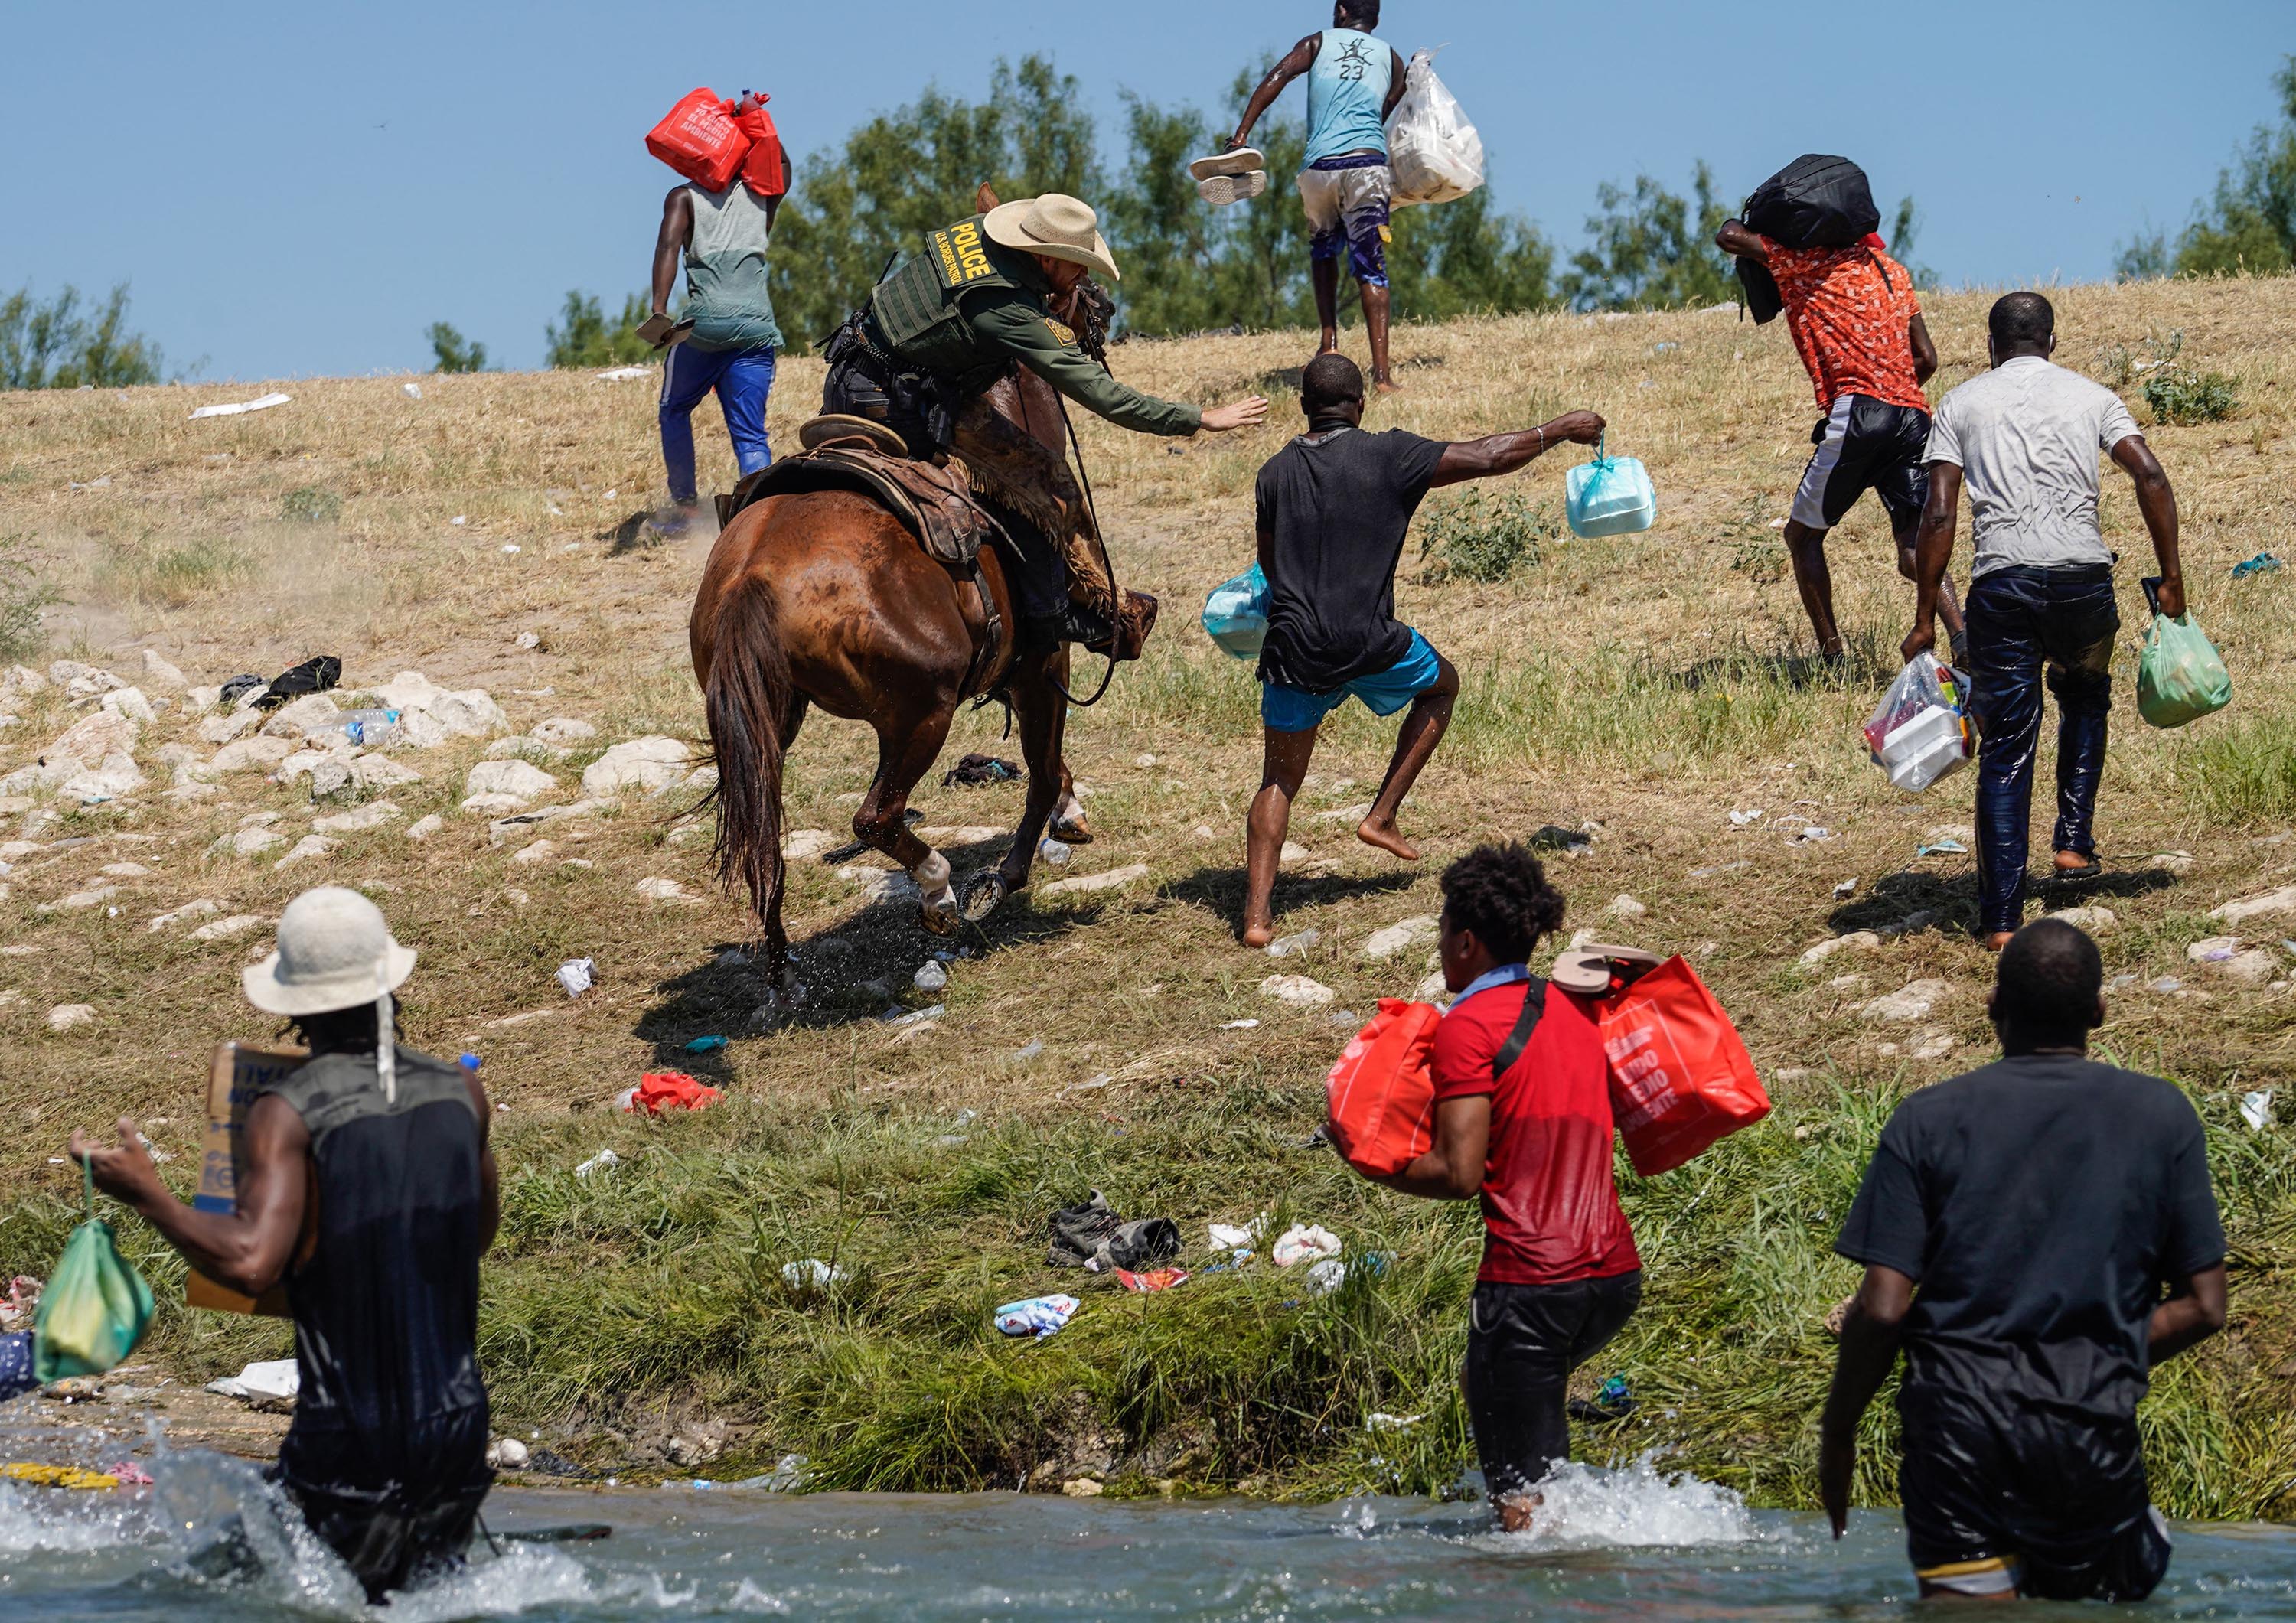 A United States Border Patrol agent on horseback tries to stop a Haitian migrant from entering an encampment on the banks of the Rio Grande near the Acuna Del Rio International Bridge in Del Rio, Texas on September 19, 2021.